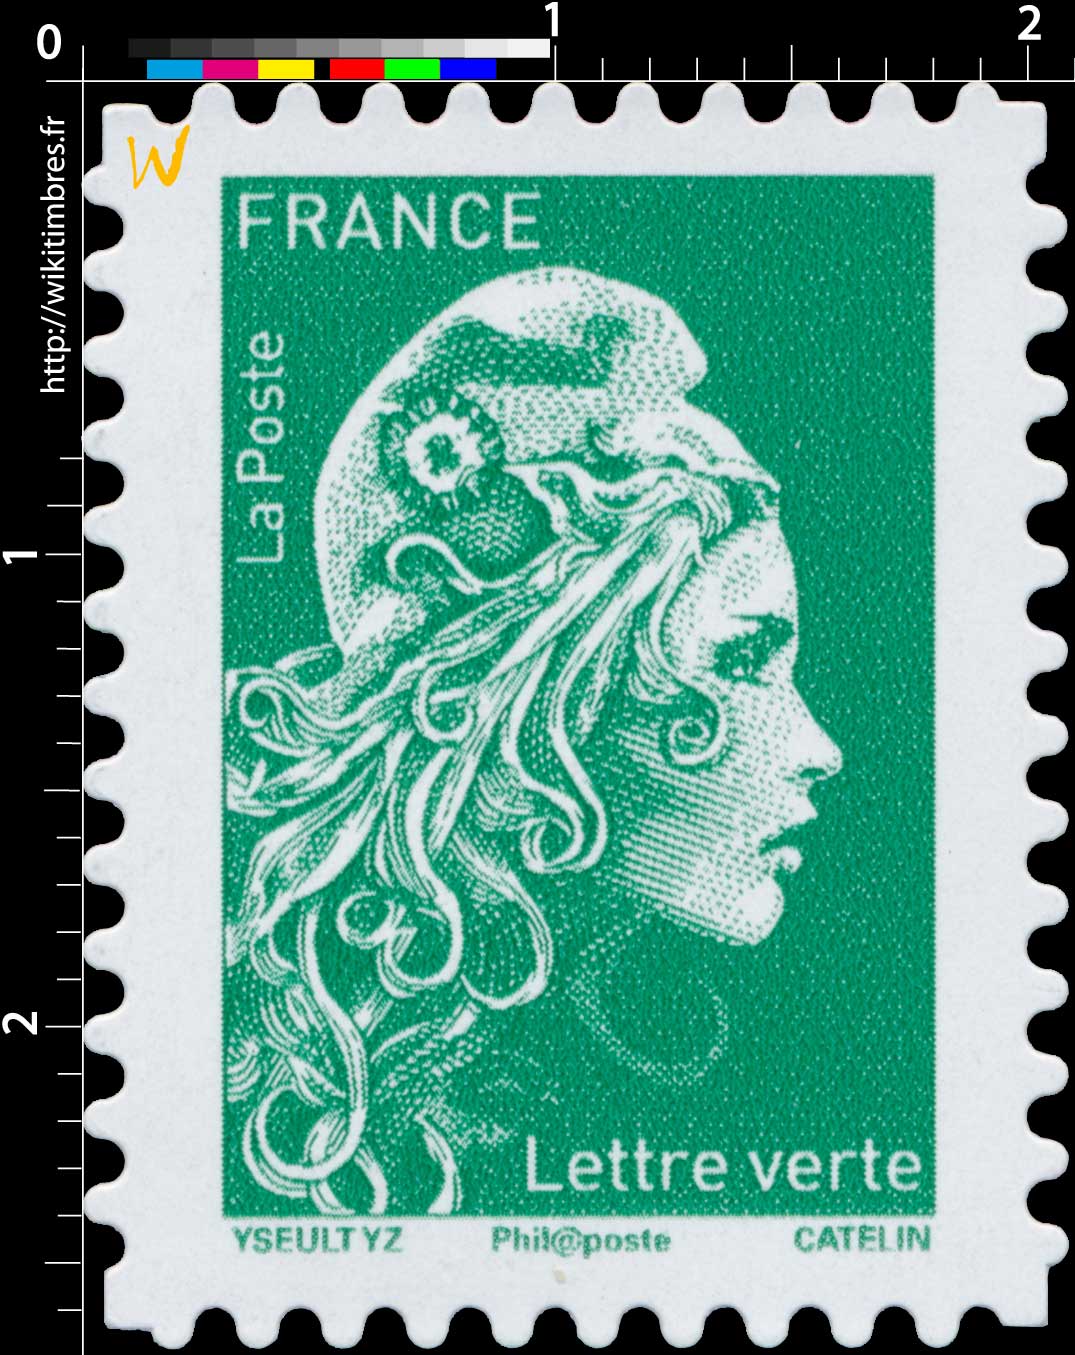 2018 Type Marianne l'engagée d'Yseult